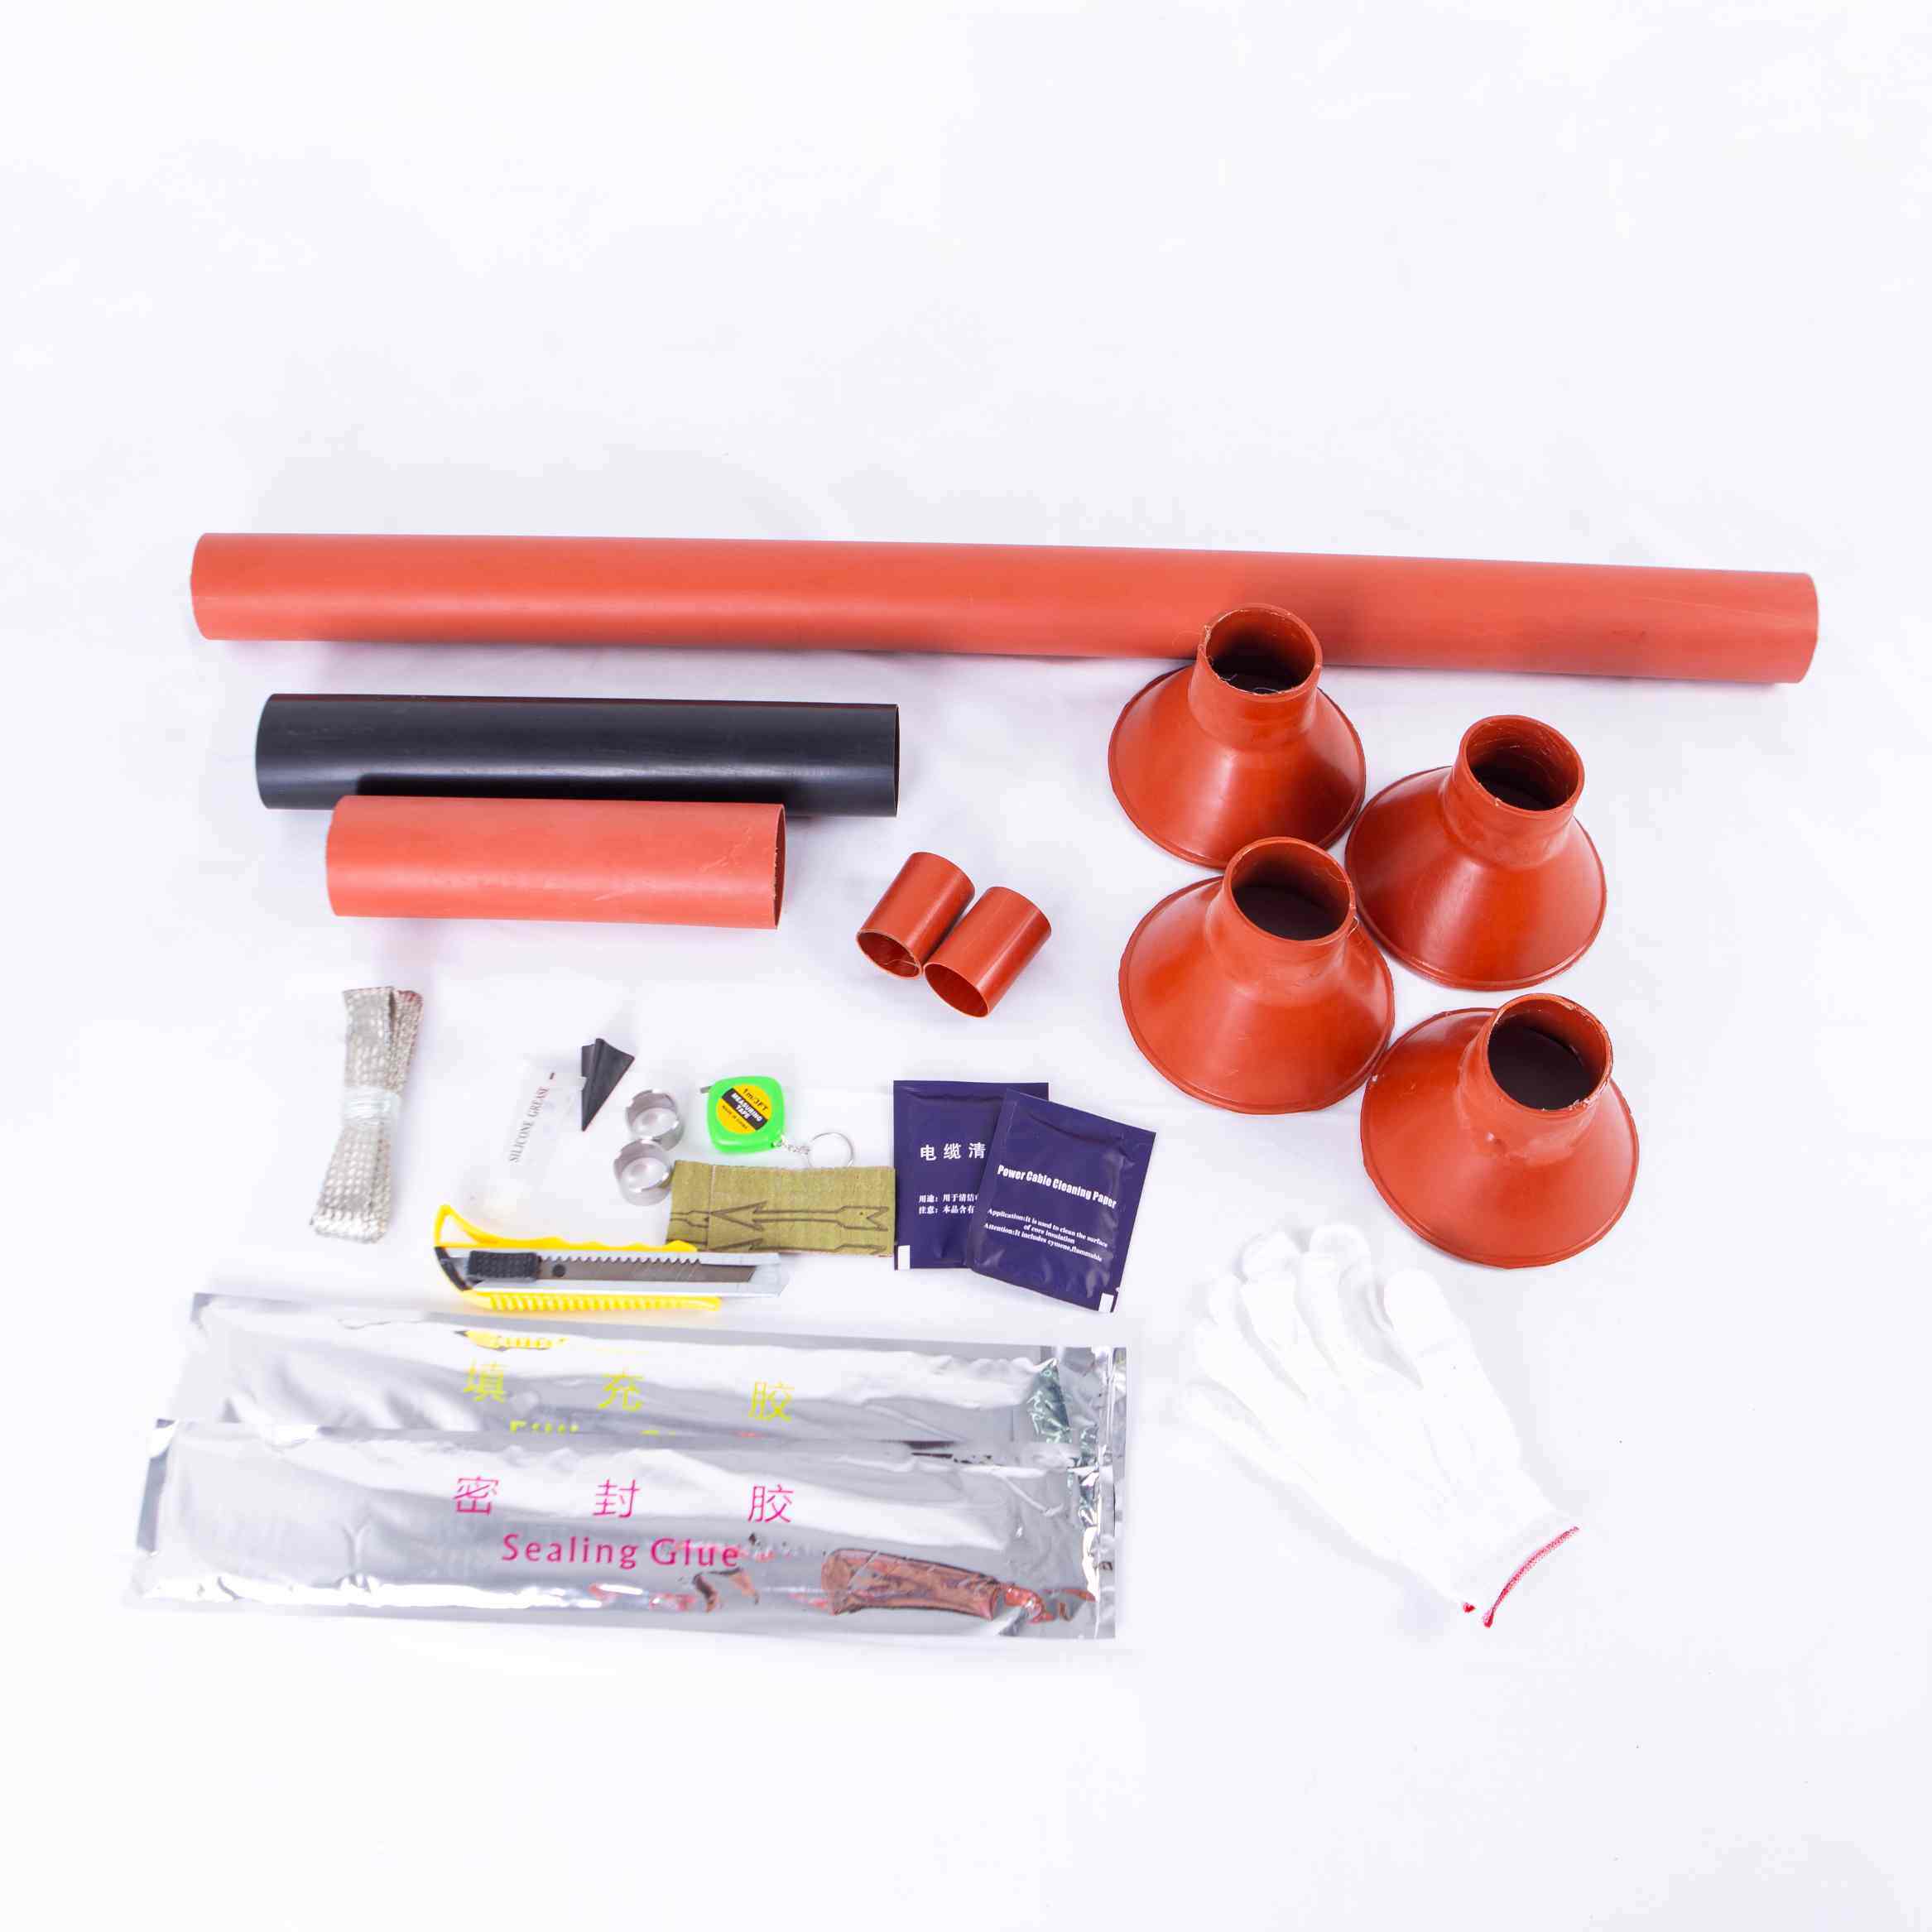 10kv 1 Core Heat Shrink Terminal with Accessories Kit